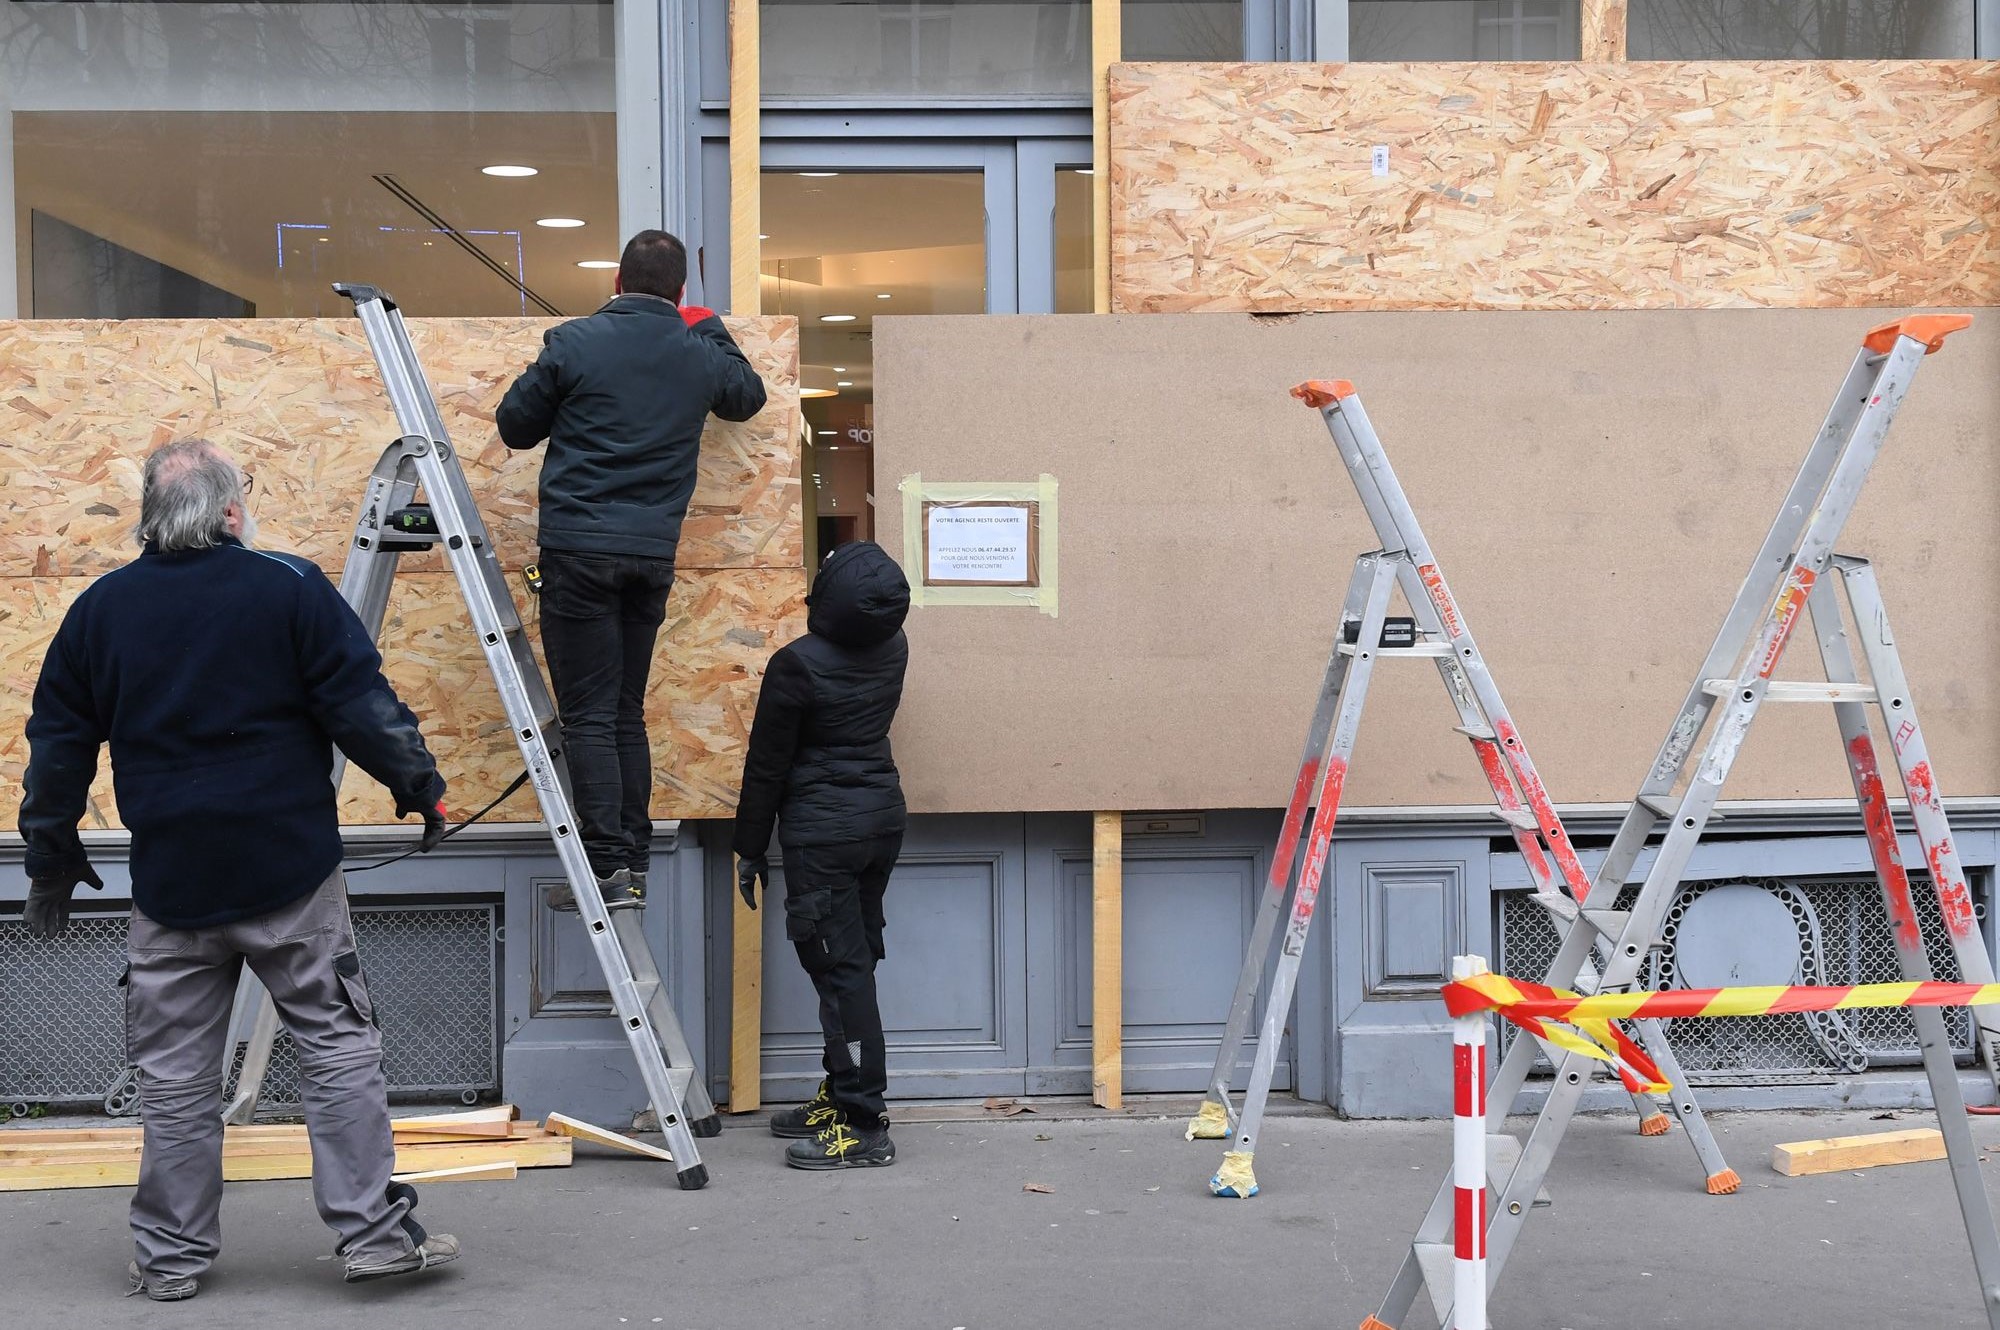 France strike jan 2023 workers board up a store ahead of a demonstration in paris on jan. 19 bloomberg